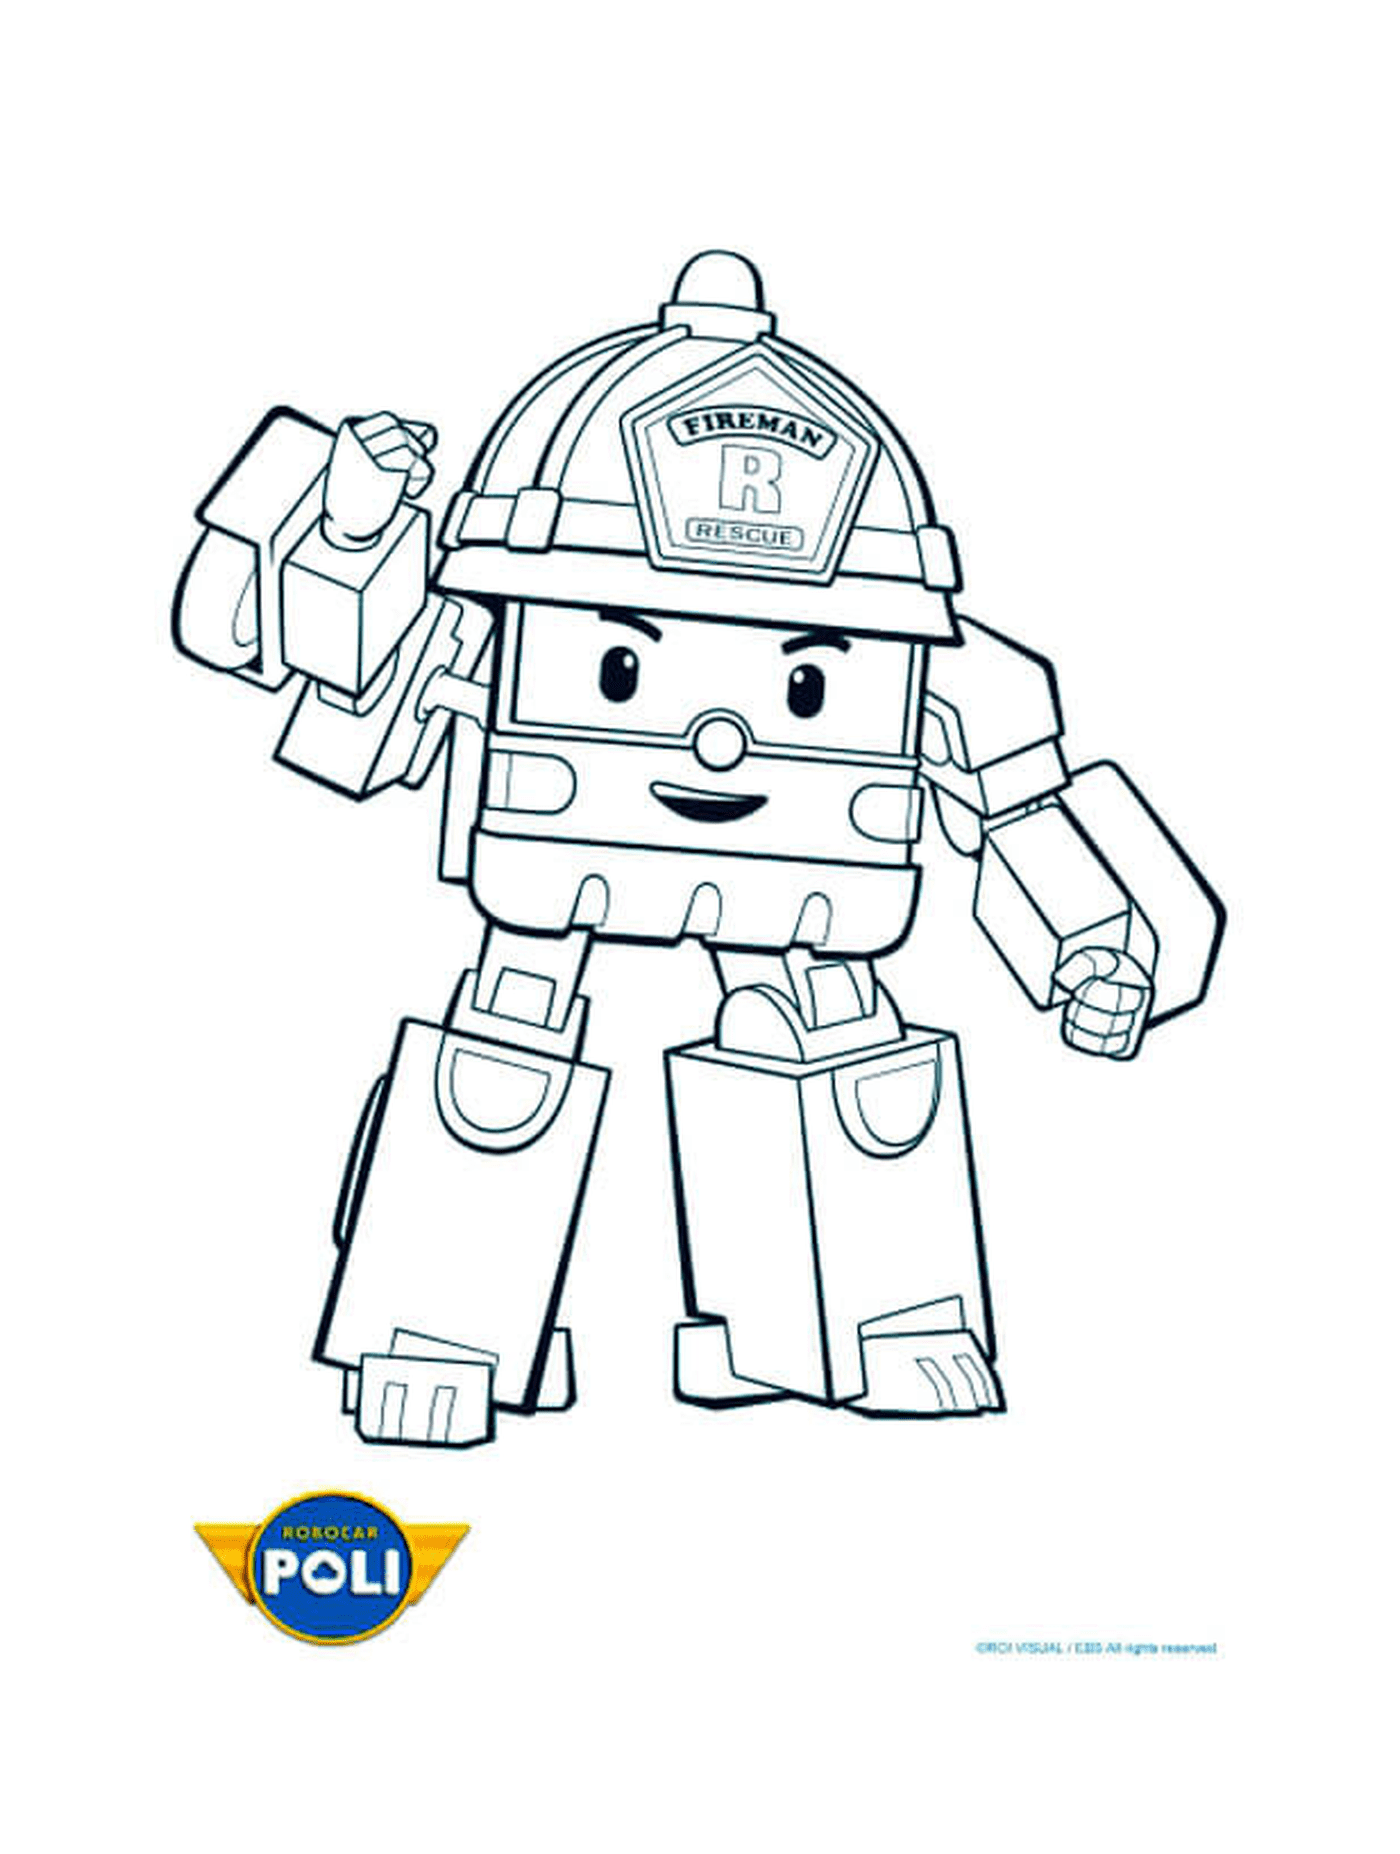  Firefighter ready for the road in Robocar Poli 